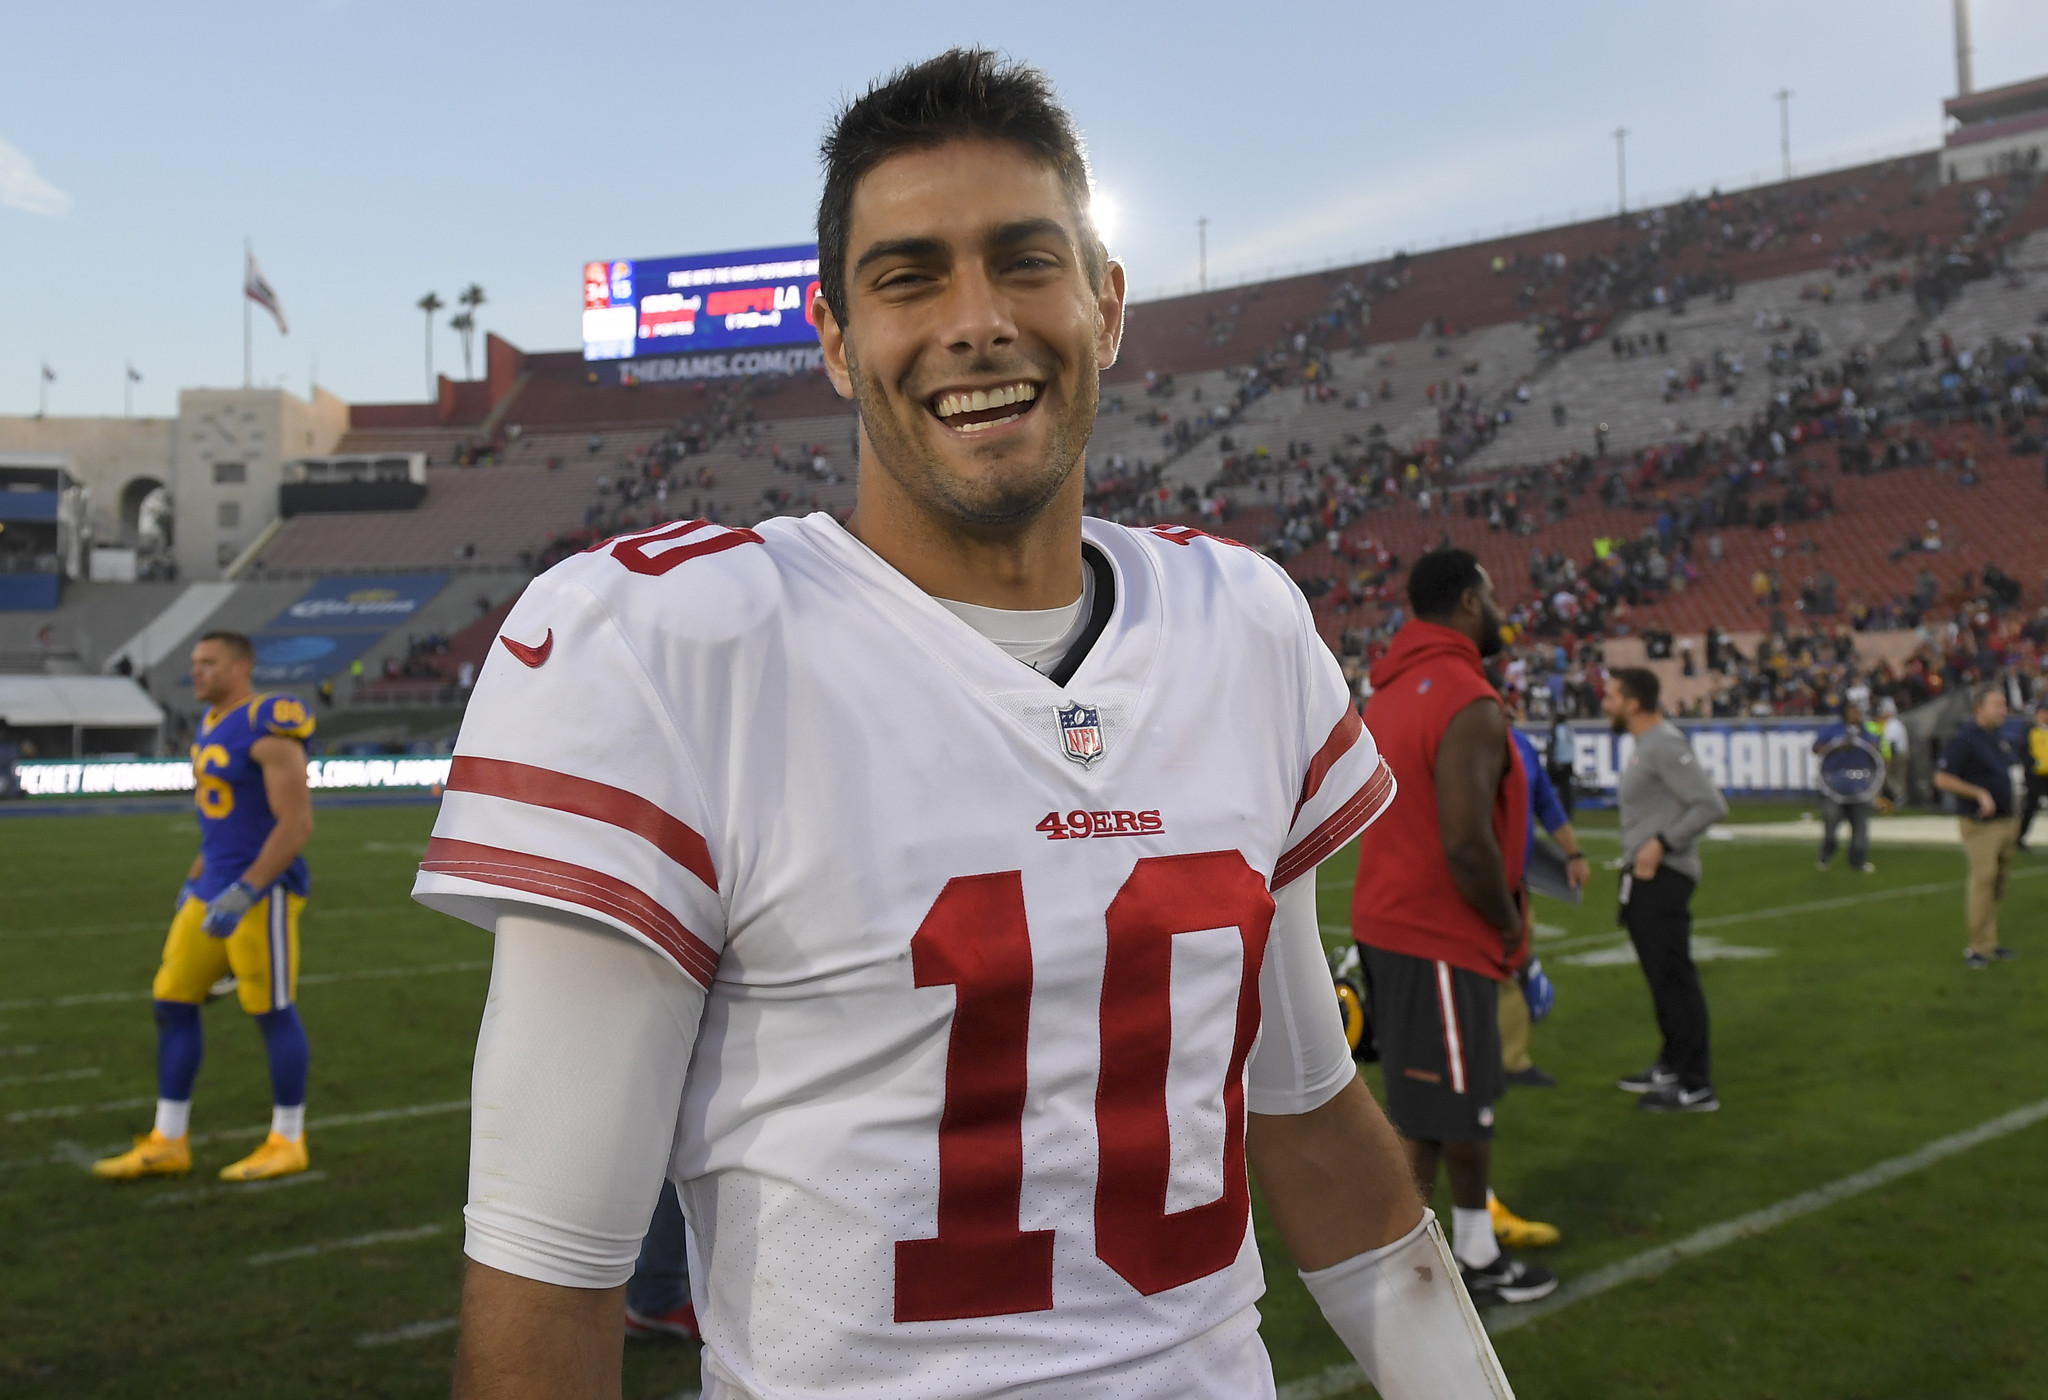 49ers re-sign QB Jimmy Garoppolo to 5-year deal worth $137.5 million - Chicago Tribune2048 x 1400